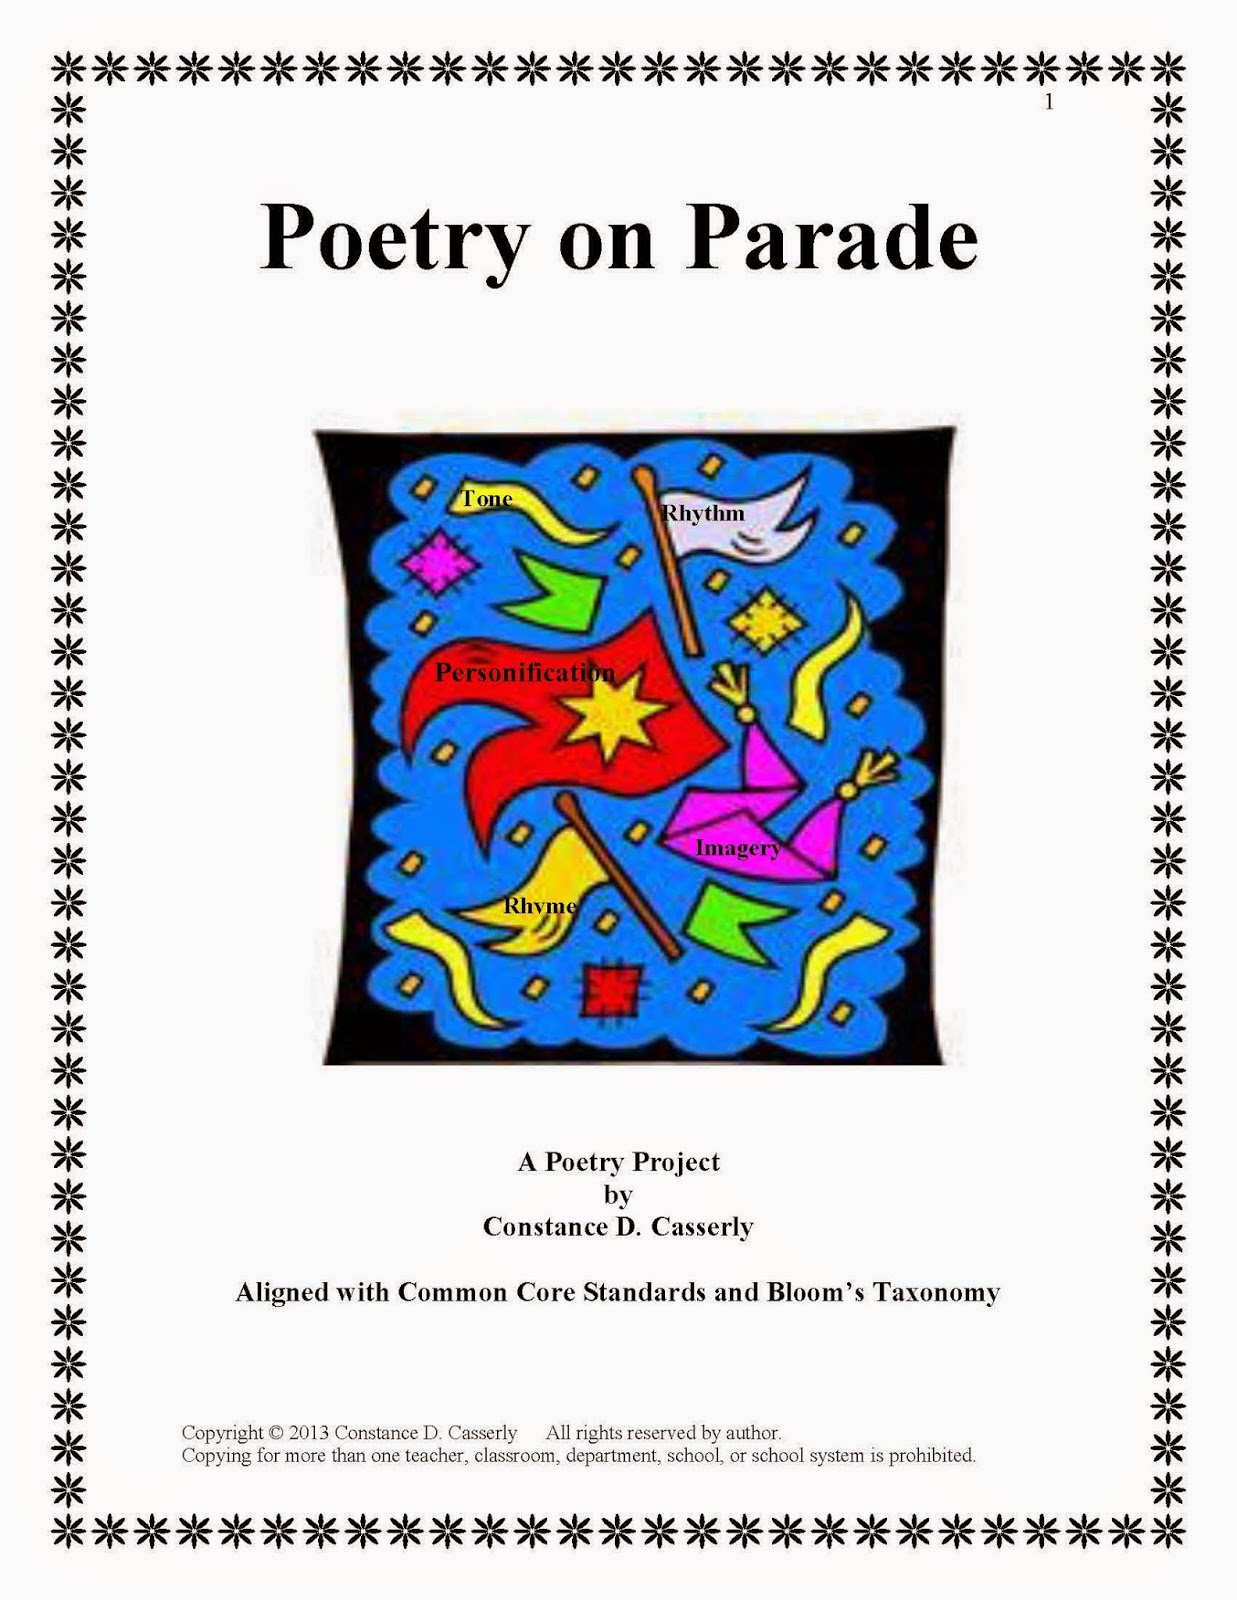 Poetry Analysis Activity: Poetry on Parade